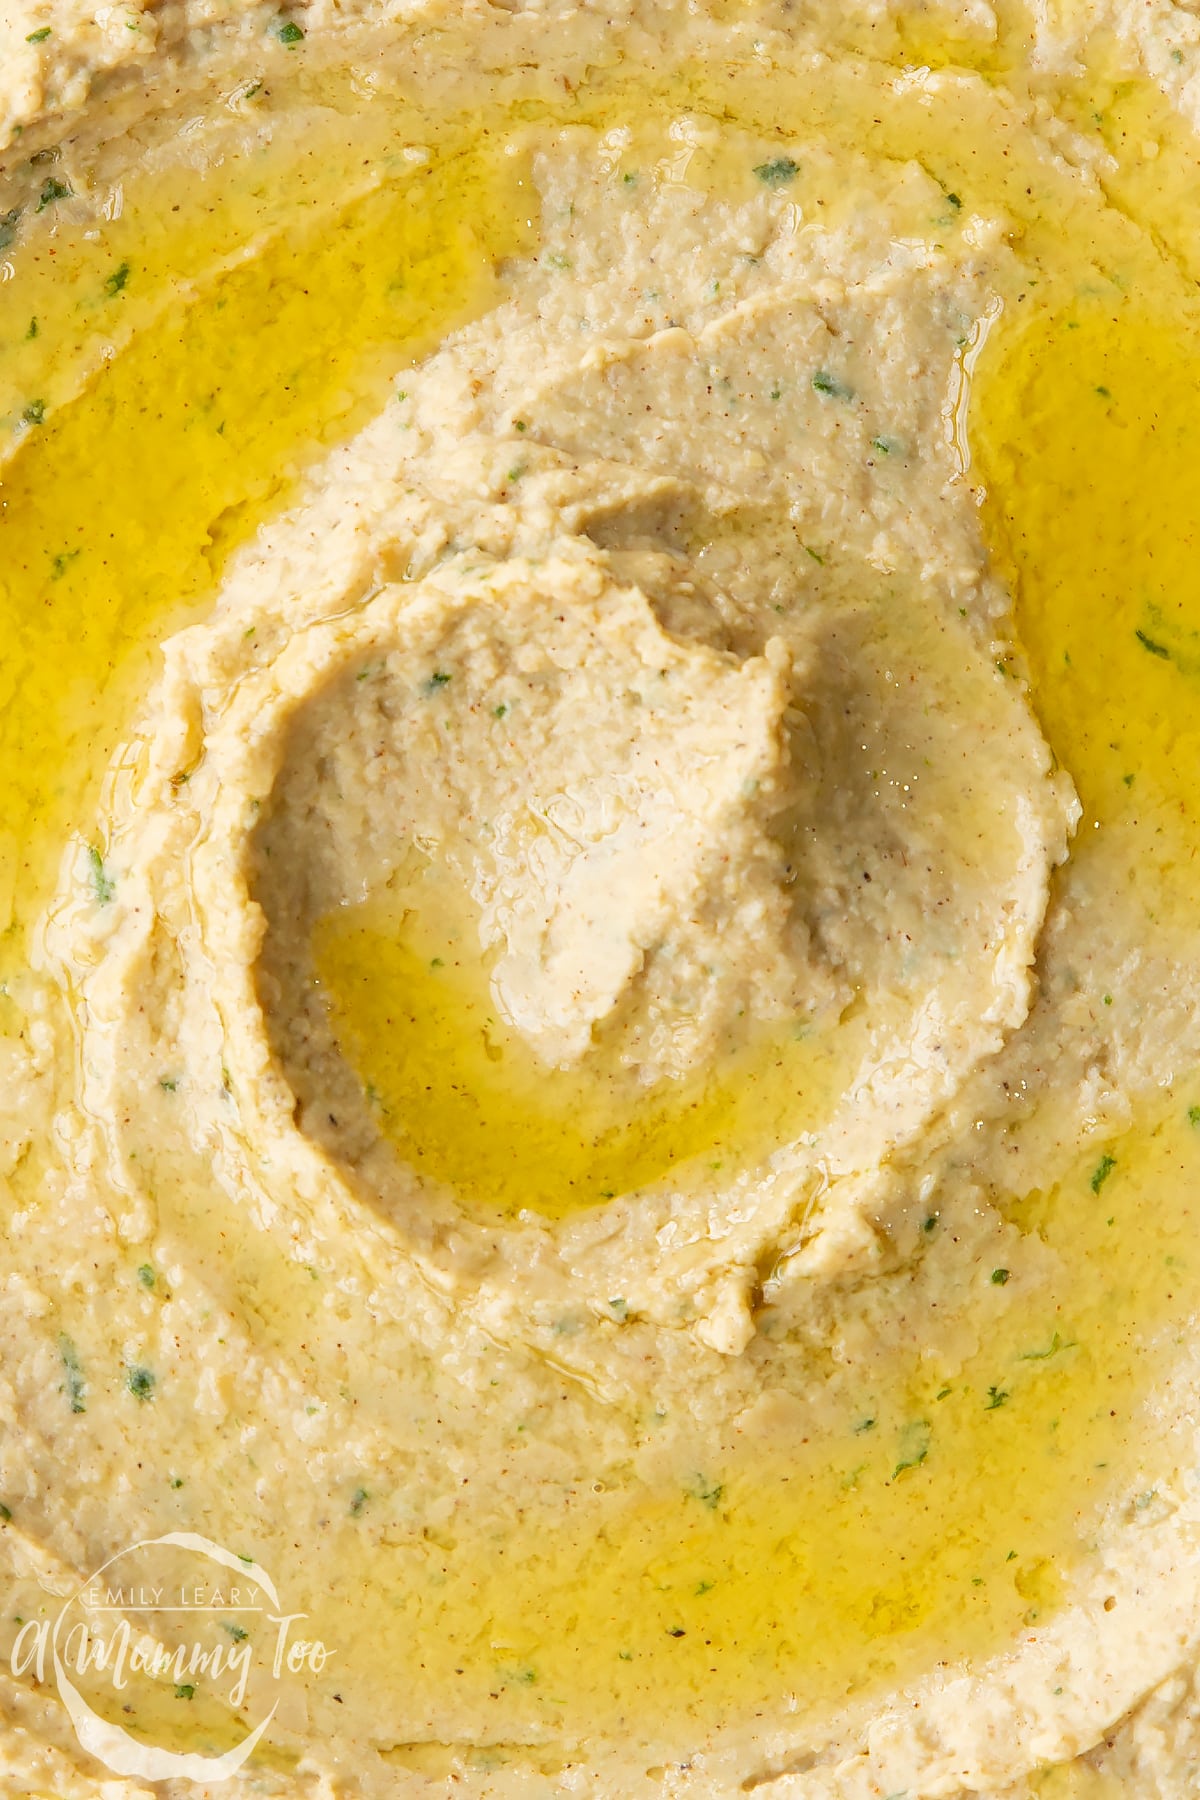 Cinnamon hummus from above in close up. It has been drizzled with olive oil